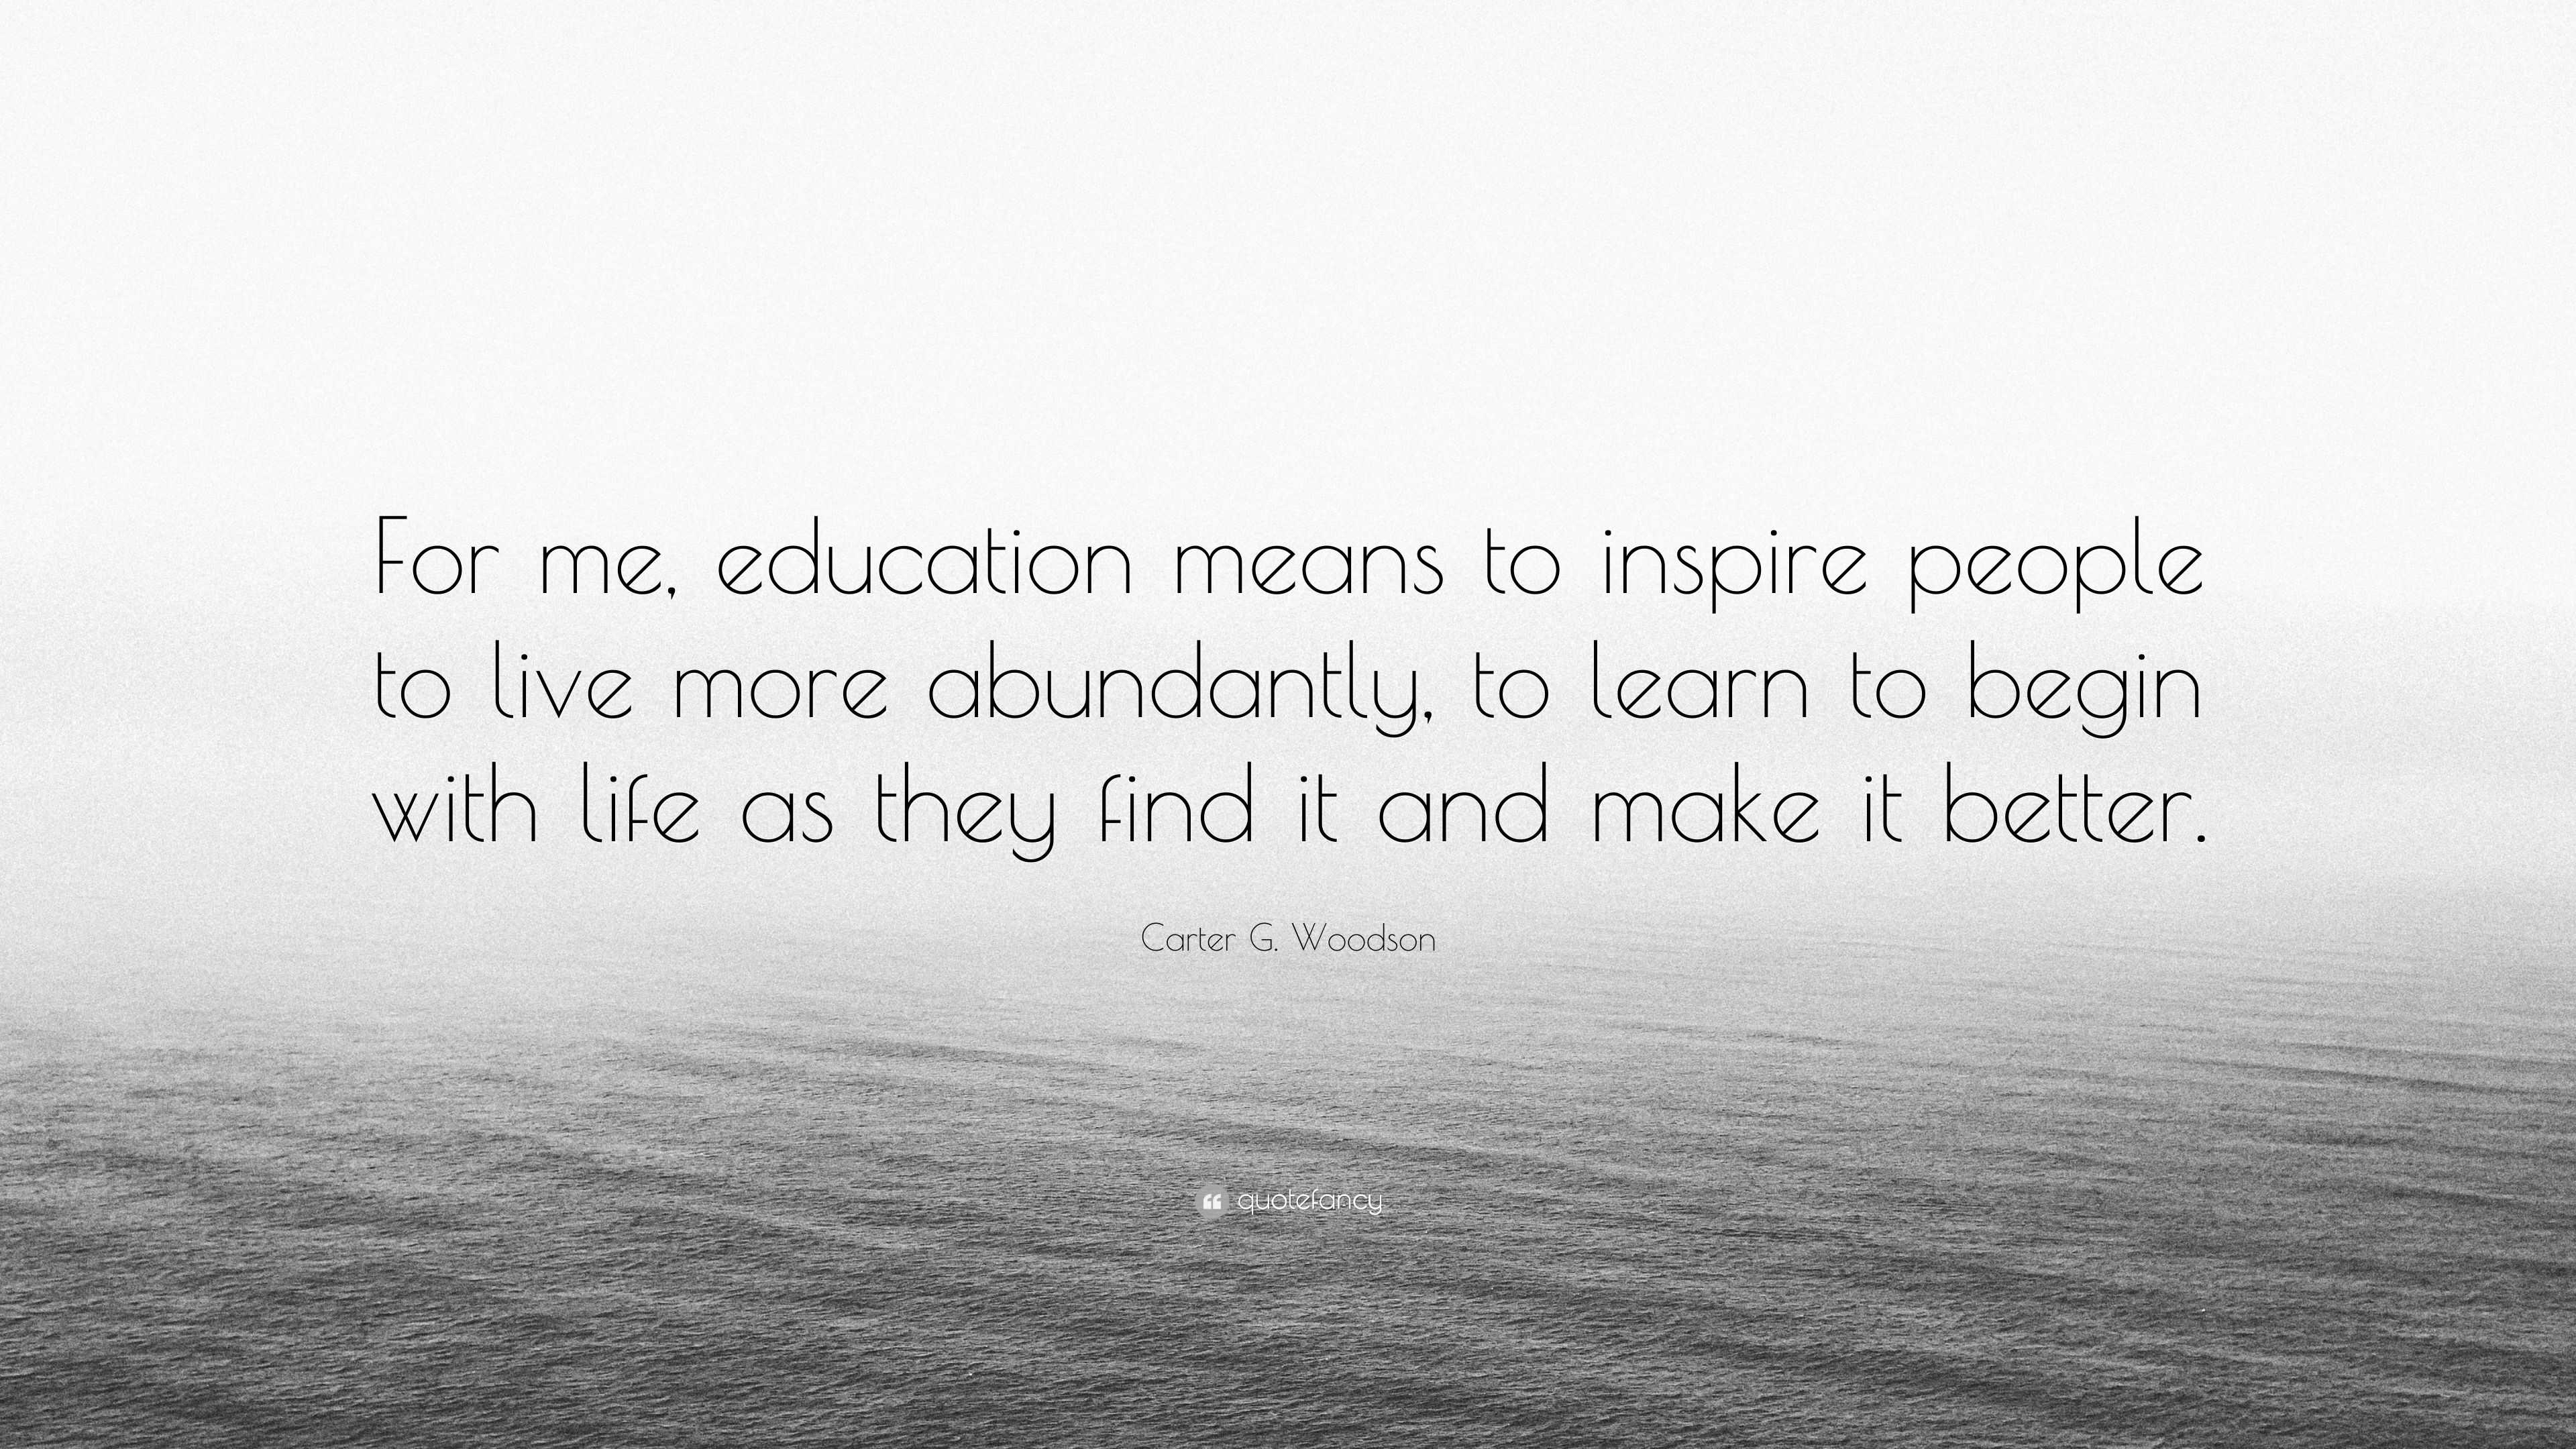 Carter G Woodson Quote “For me education means to inspire people to